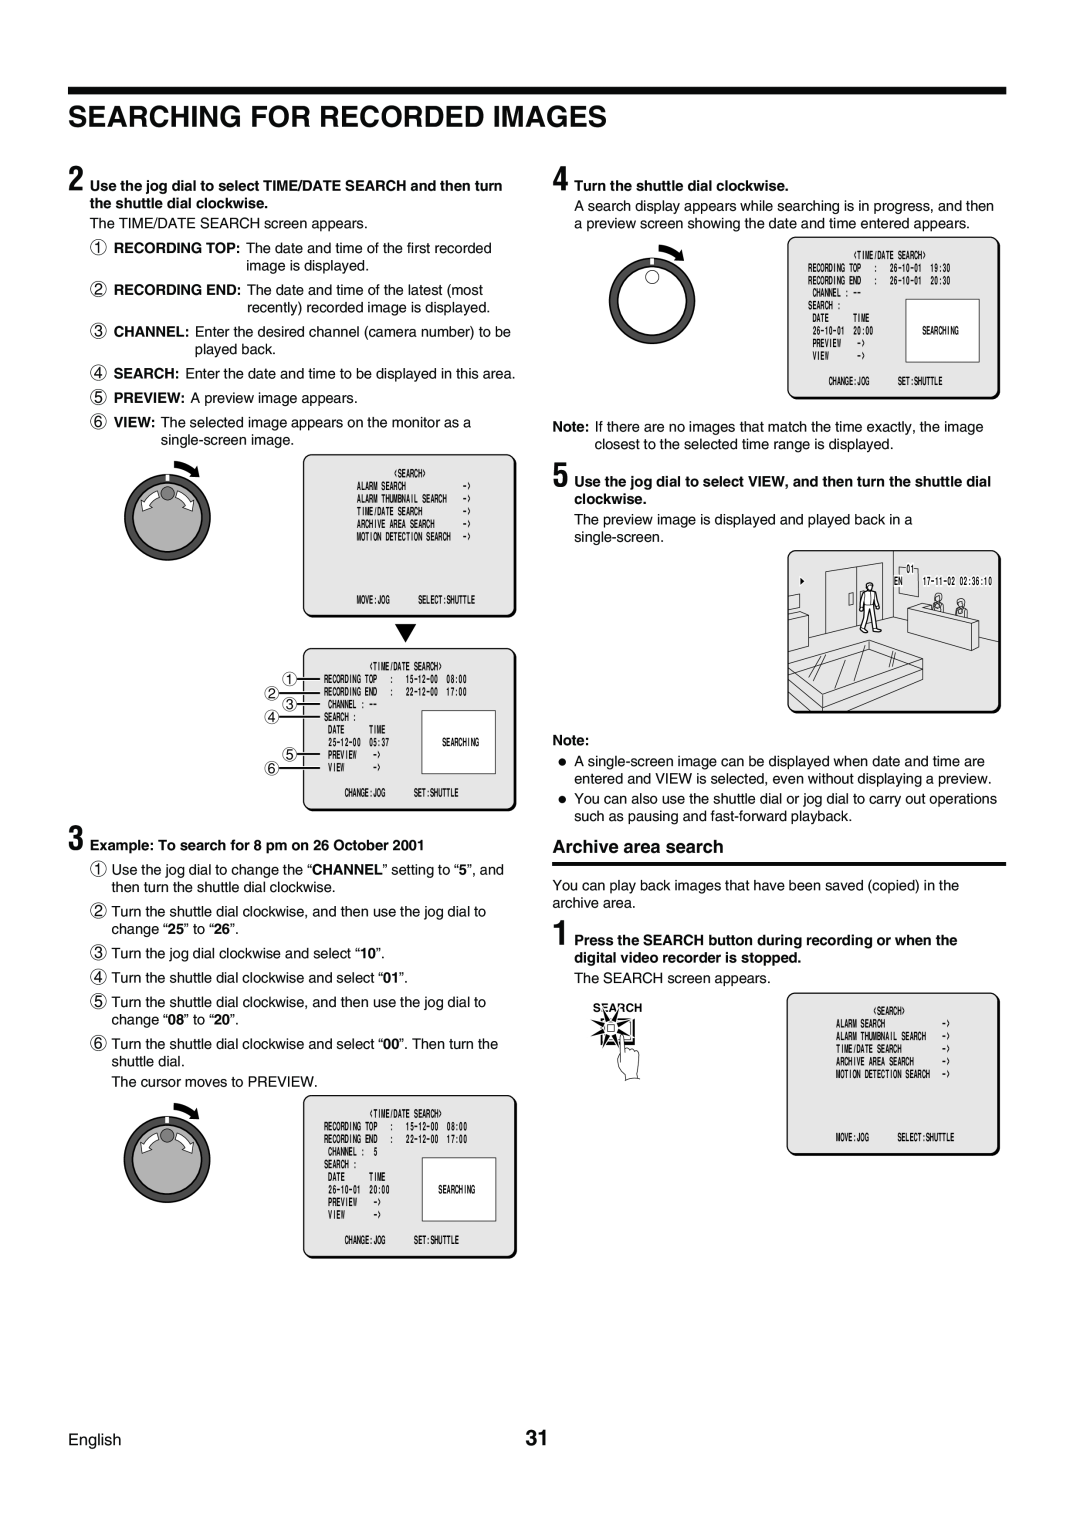 Sanyo DSR-3009P instruction manual Searching For Recorded Images, Archive area search 